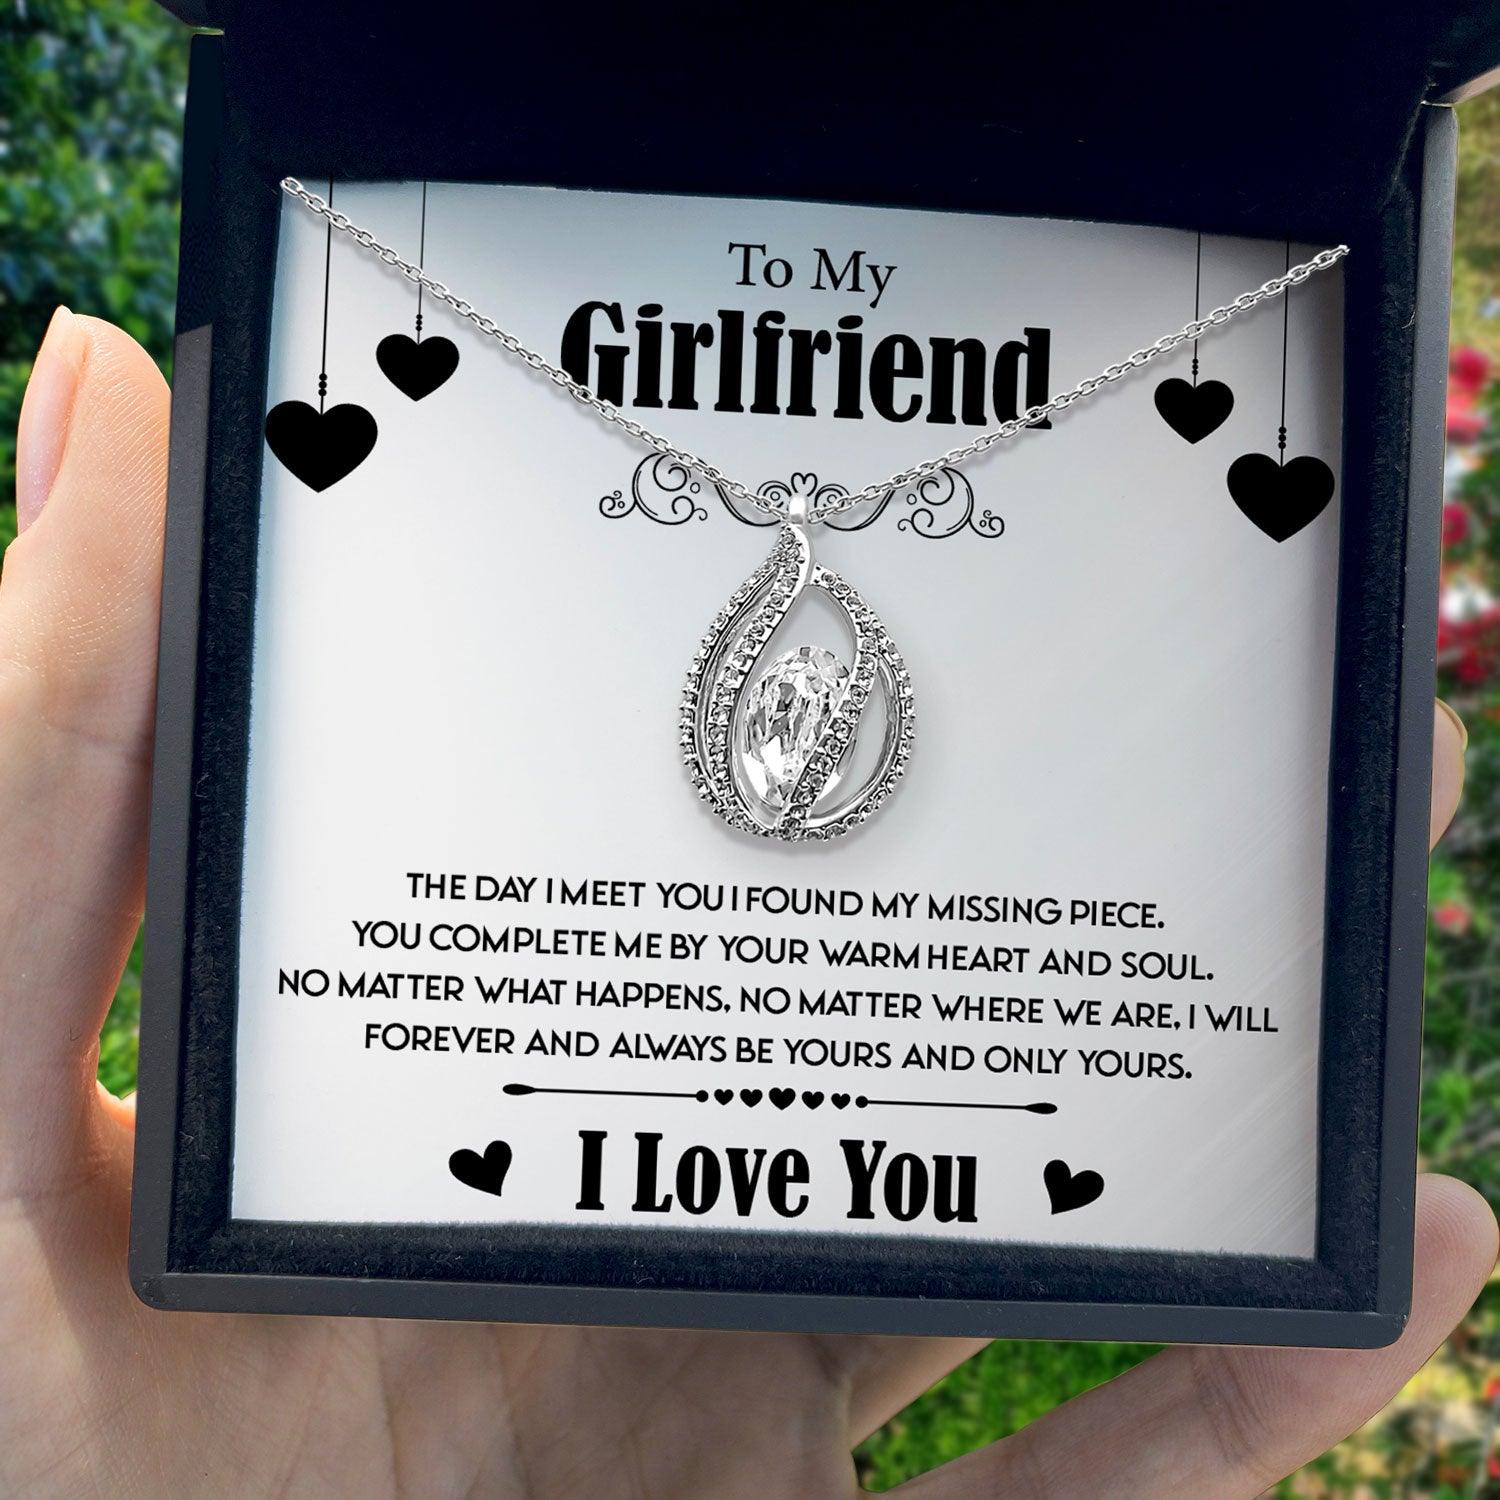 To My Girlfriend - You Complete Me By Your Warm Heart And Soul - Orbital Birdcage Necklace - TRYNDI